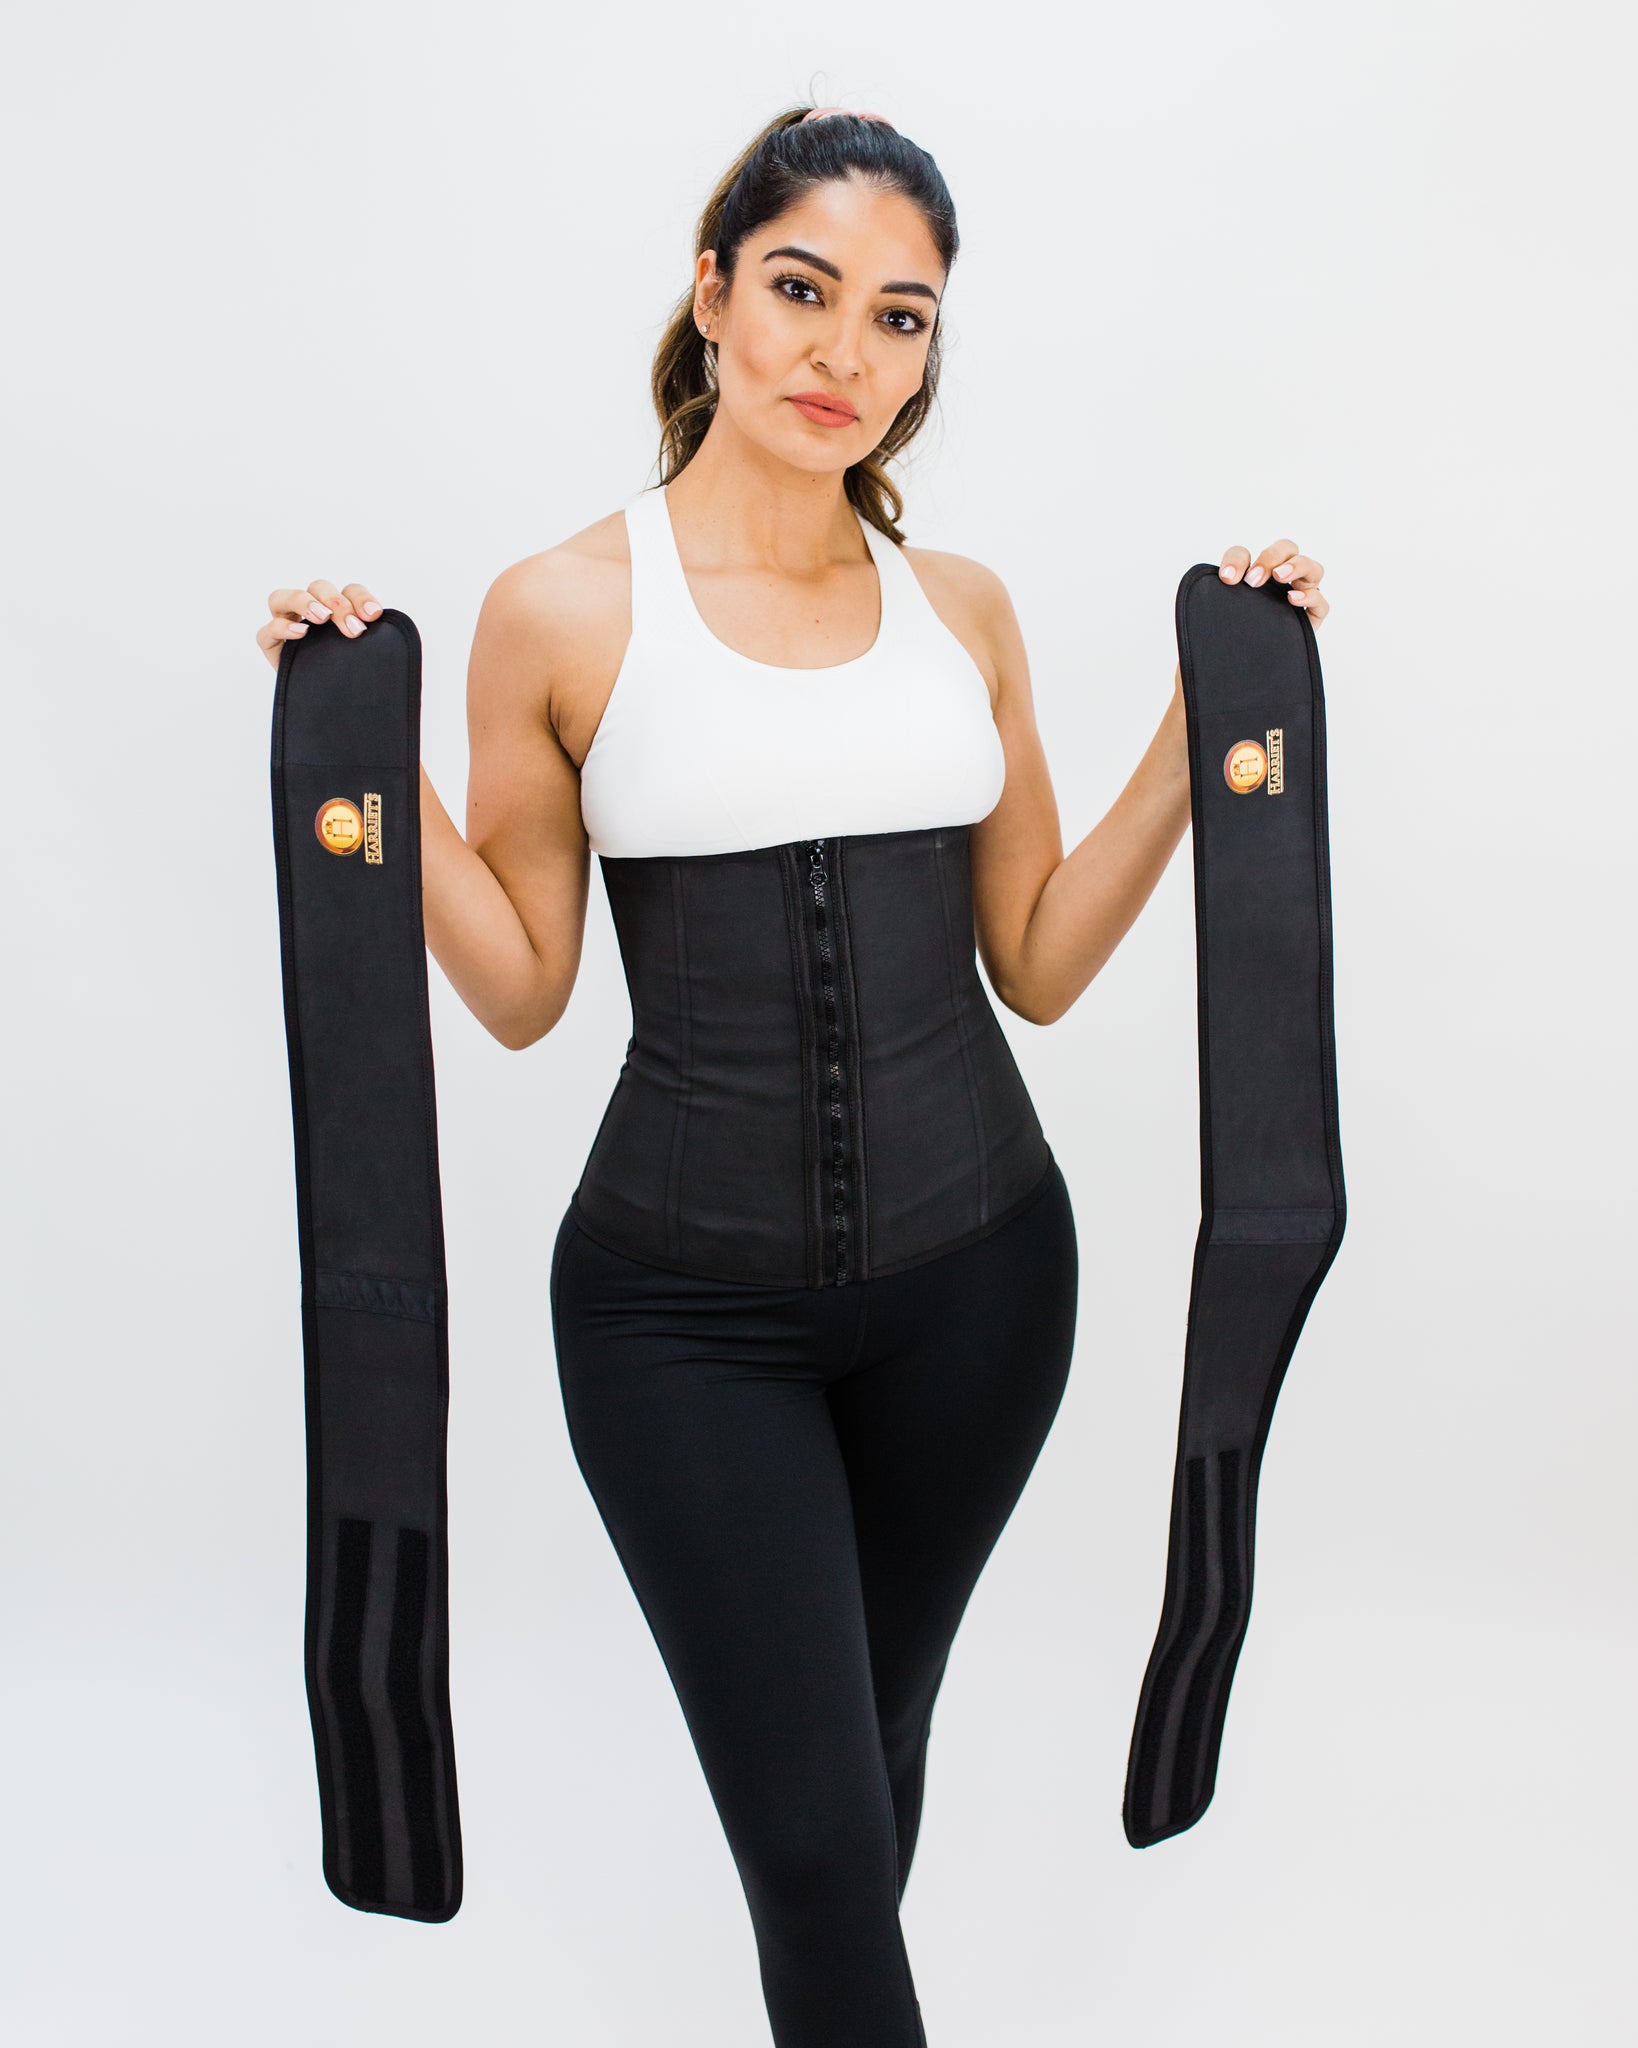 DOUBLE STRAP WAIST TRAINER – Exclusive Inches